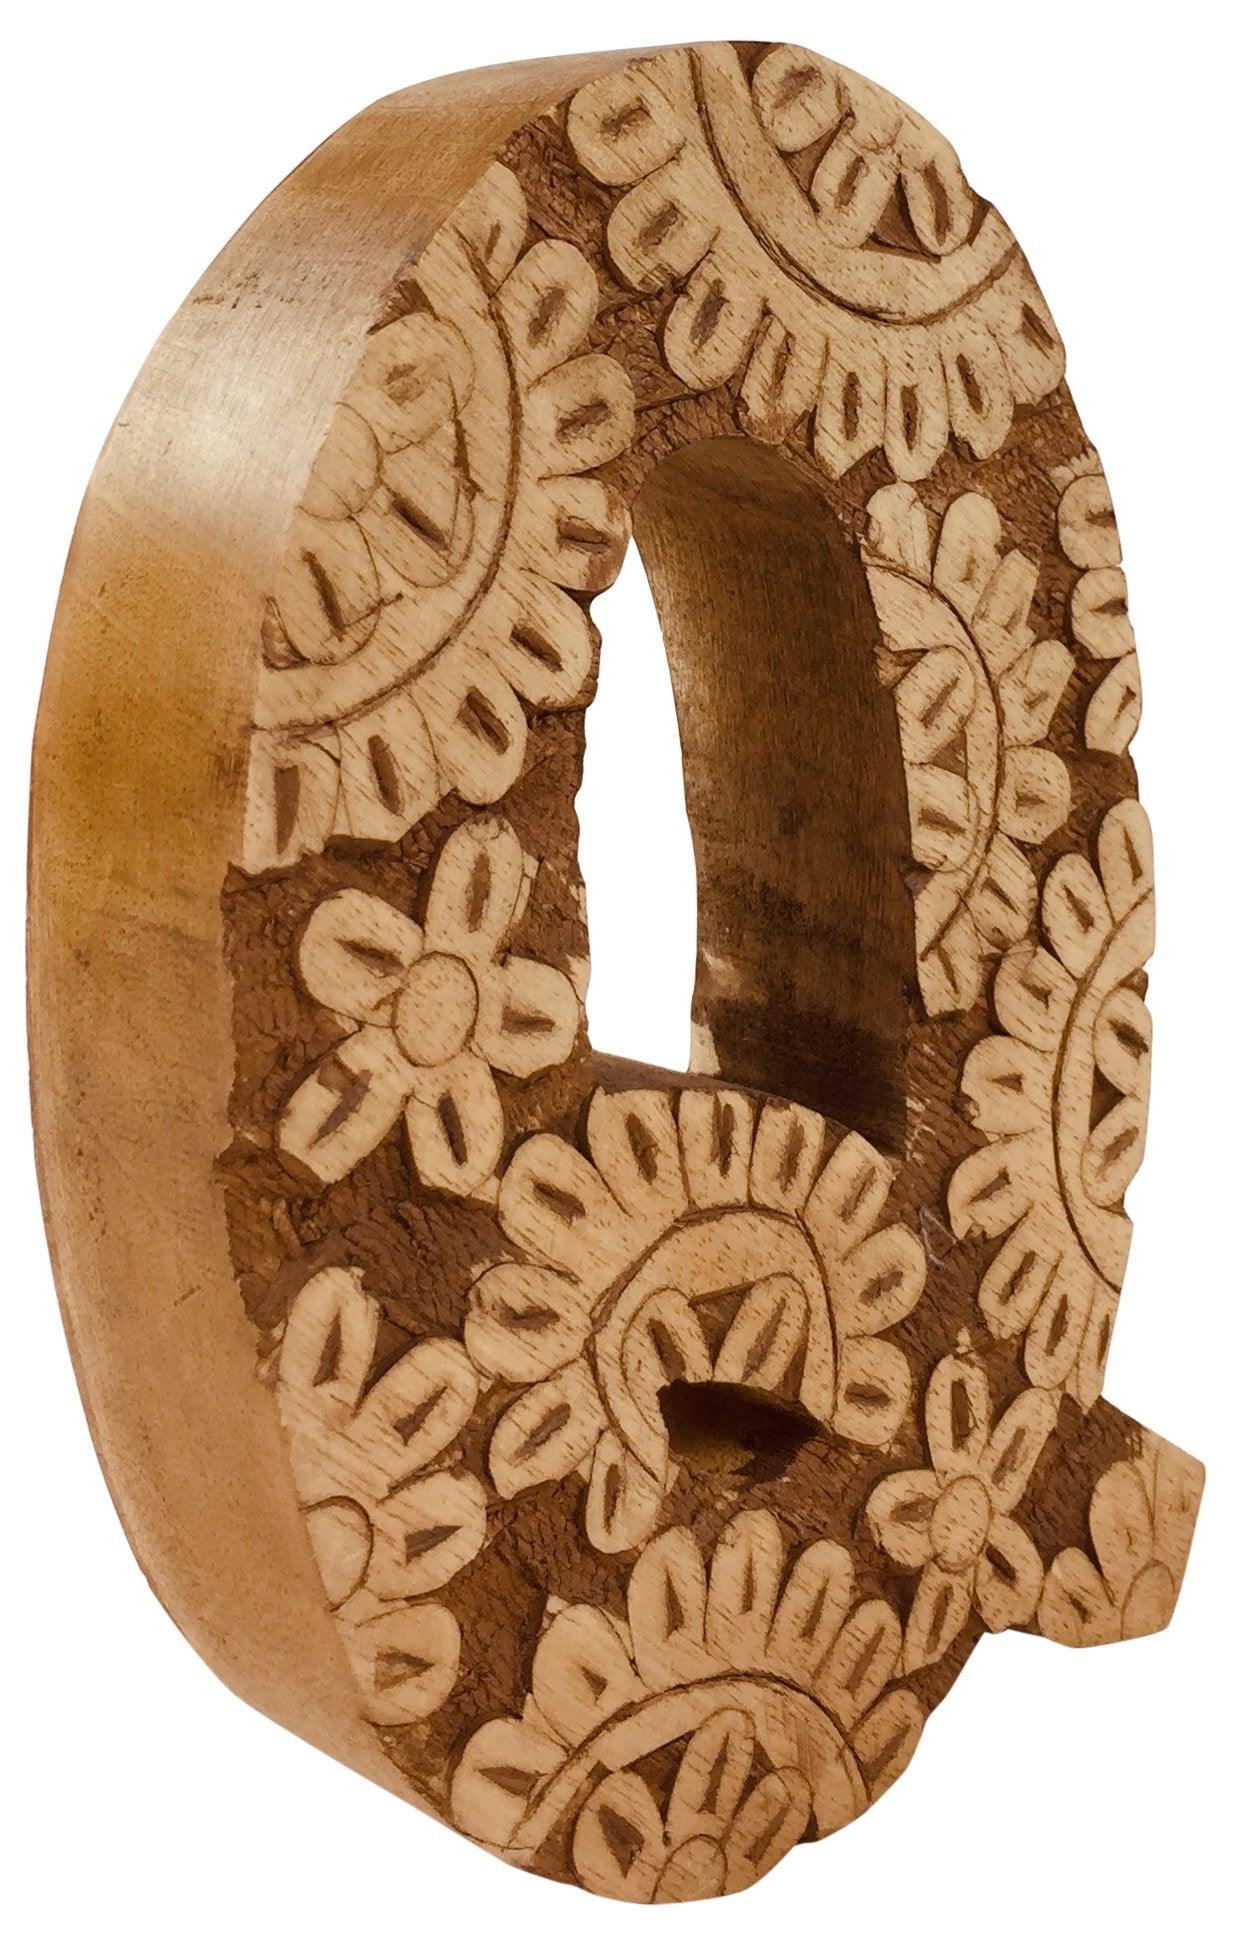 View Hand Carved Wooden Flower Letter Q information